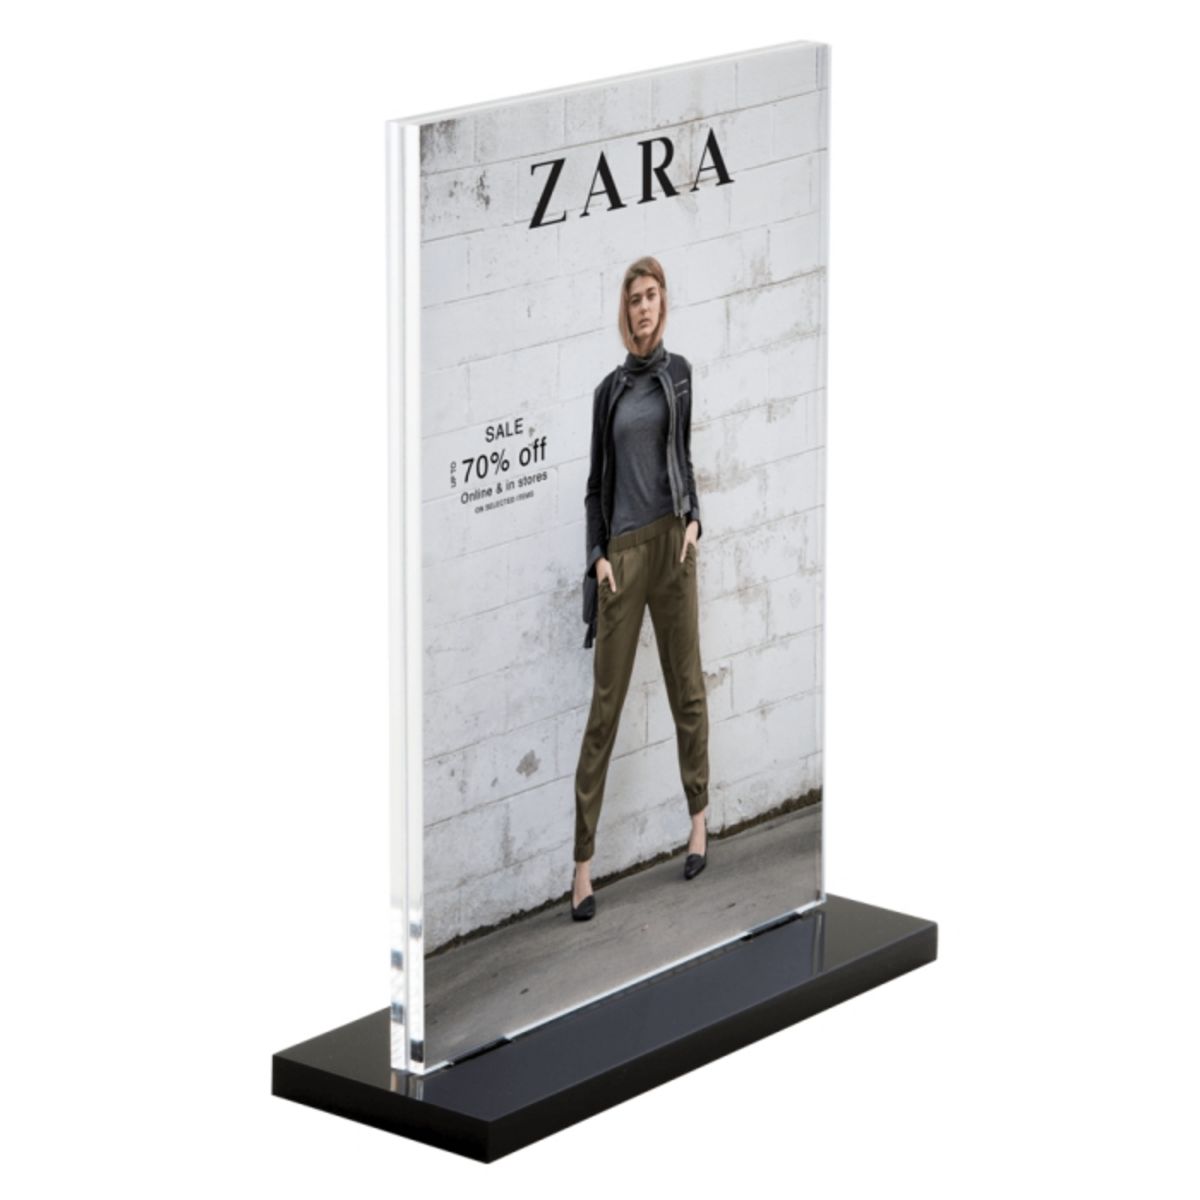 Black Counter Standing Acrylic Block Sign Holder.png